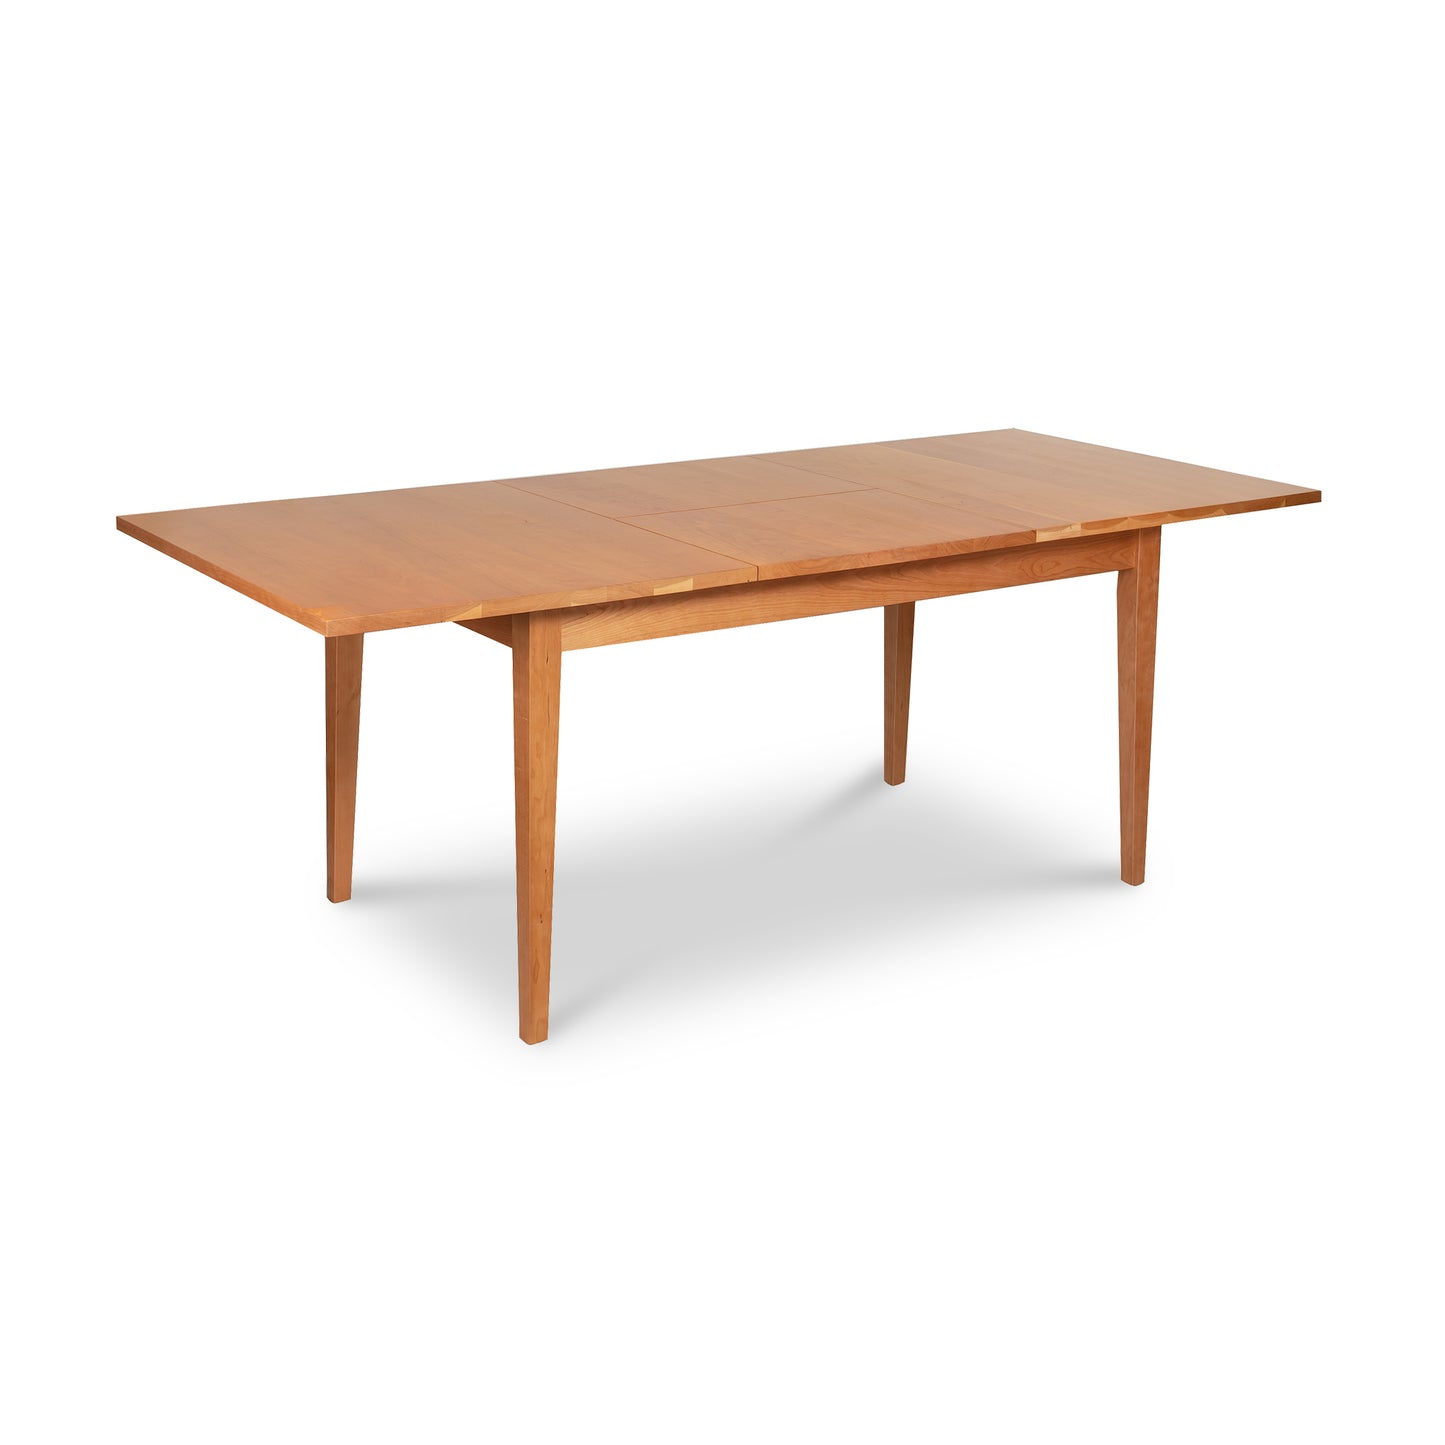 A Classic Shaker Butterfly Extension Table - Floor Model by Lyndon Furniture with a natural cherry wooden top.